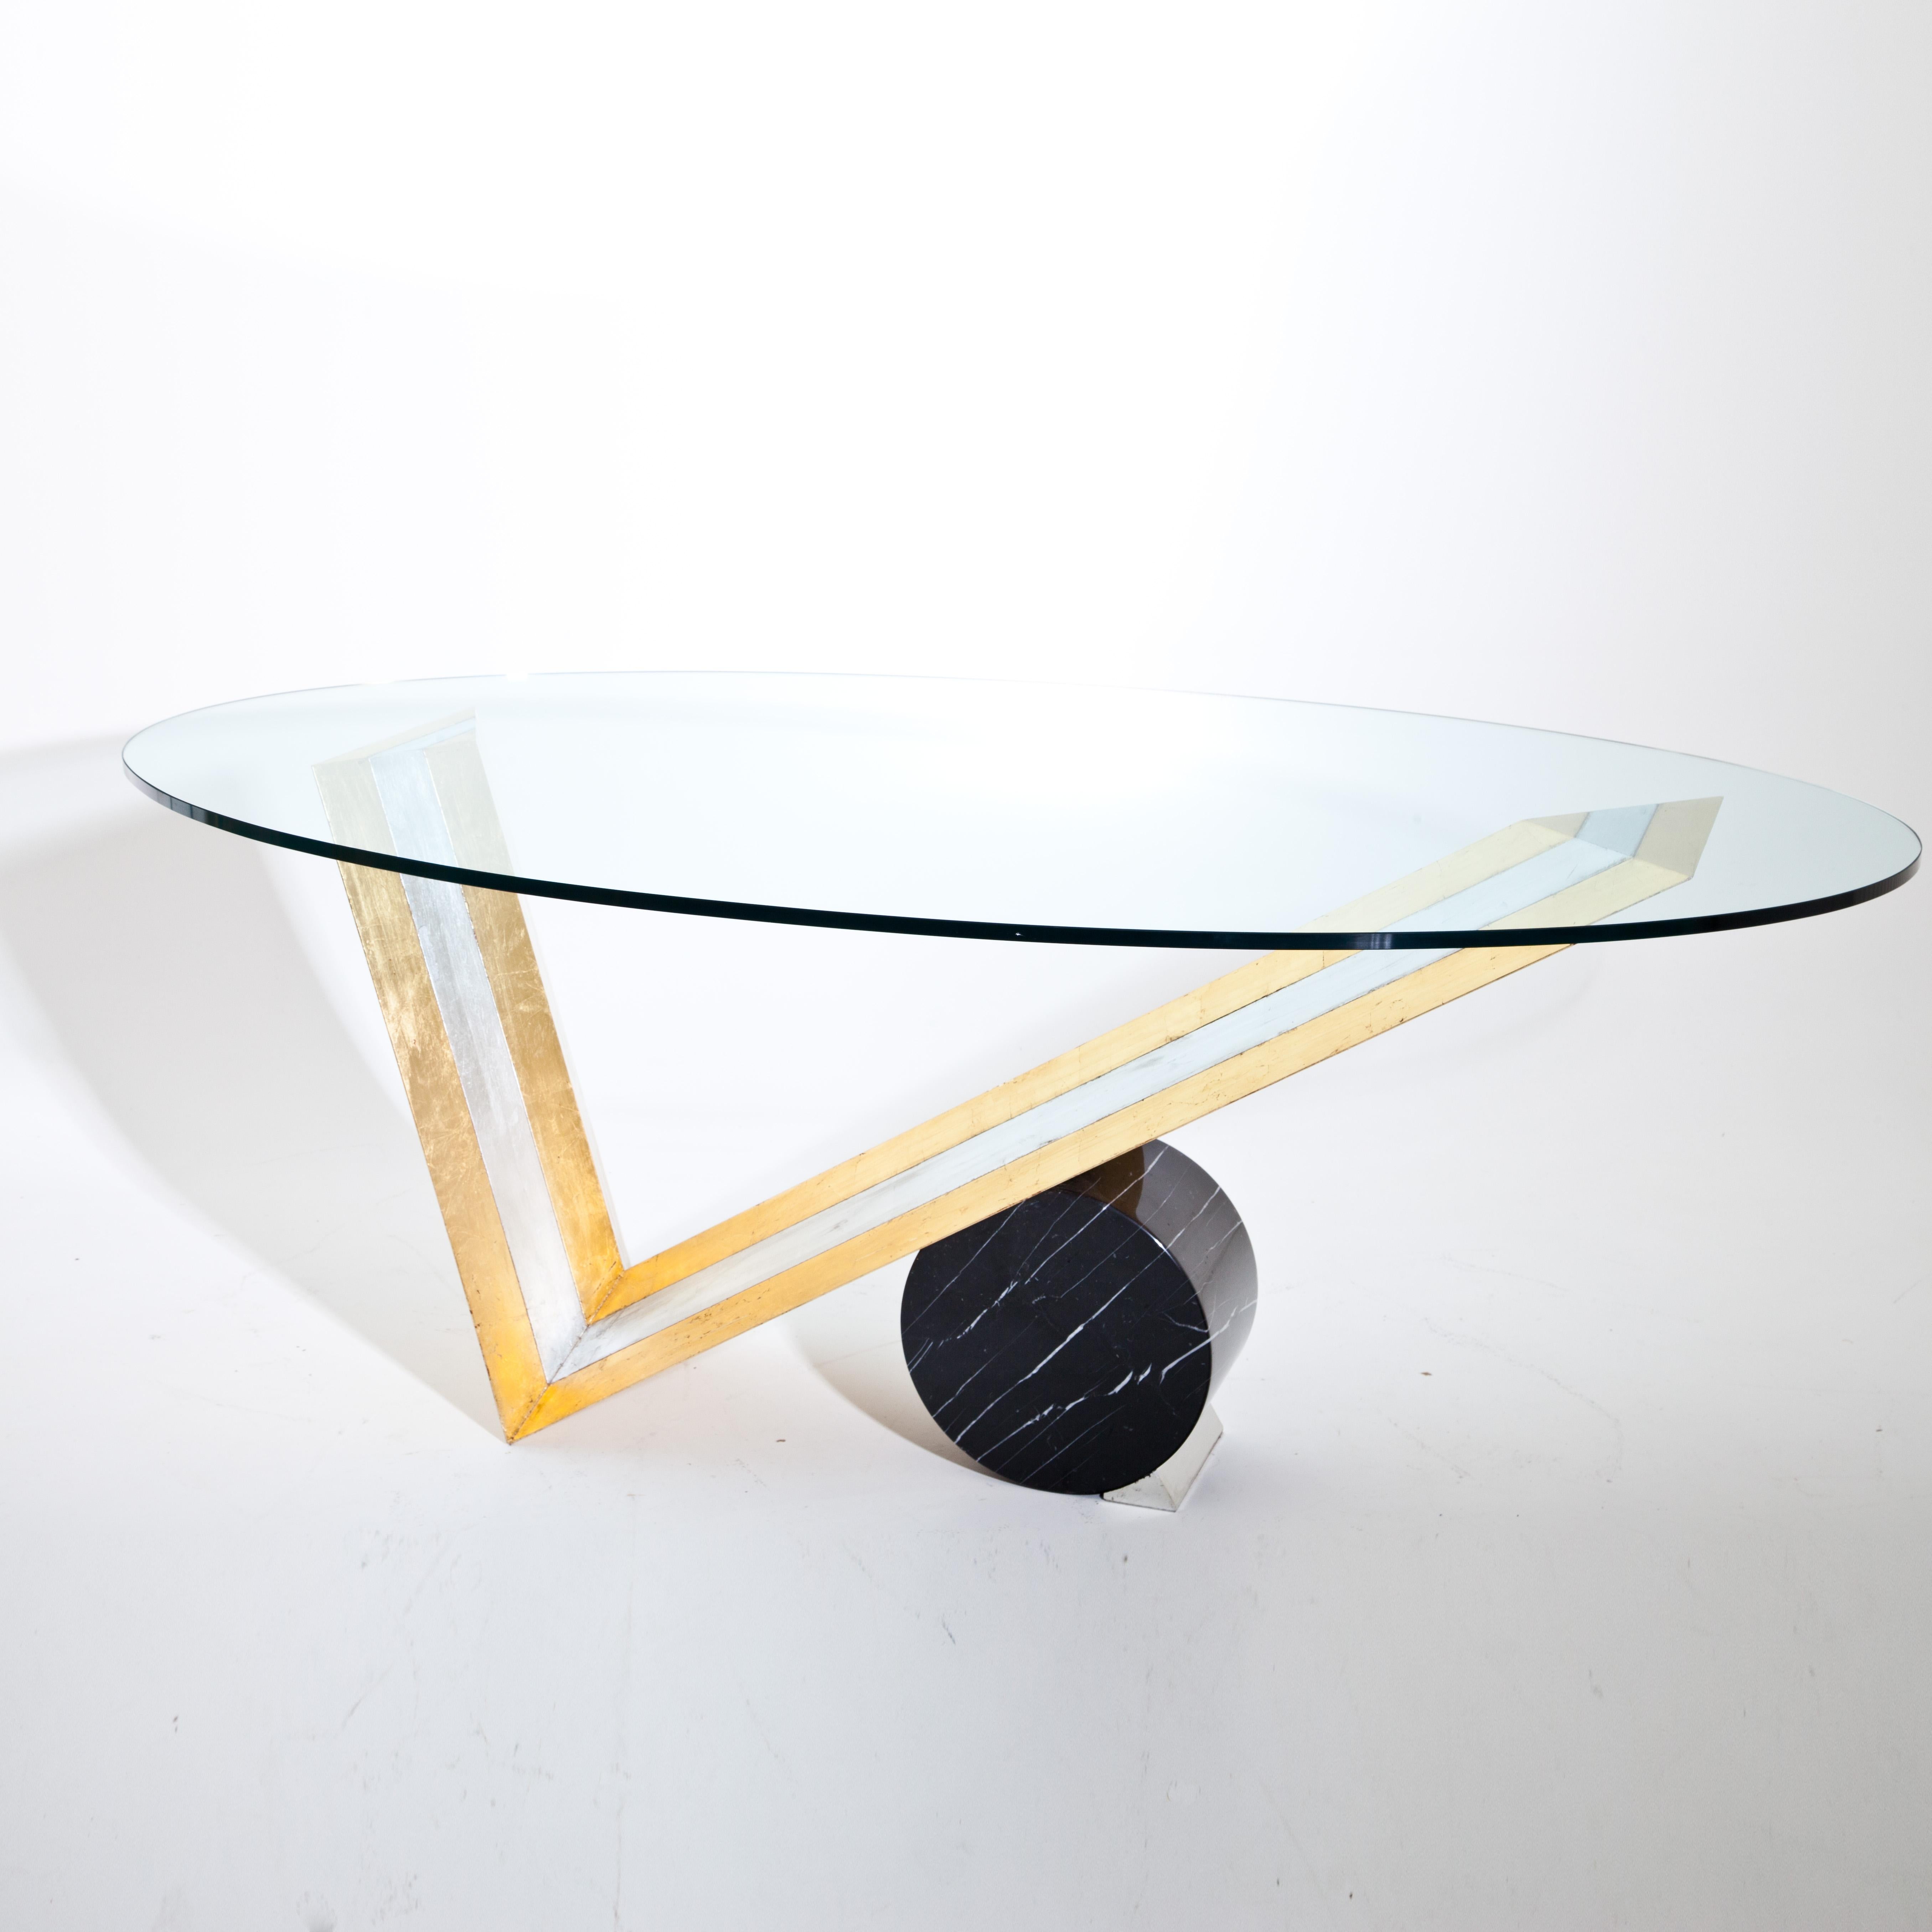 Large table with oval glass top on a V-shaped wooden frame with a large black marble cylinder block. The wooden frame is patinated in silver and gold.